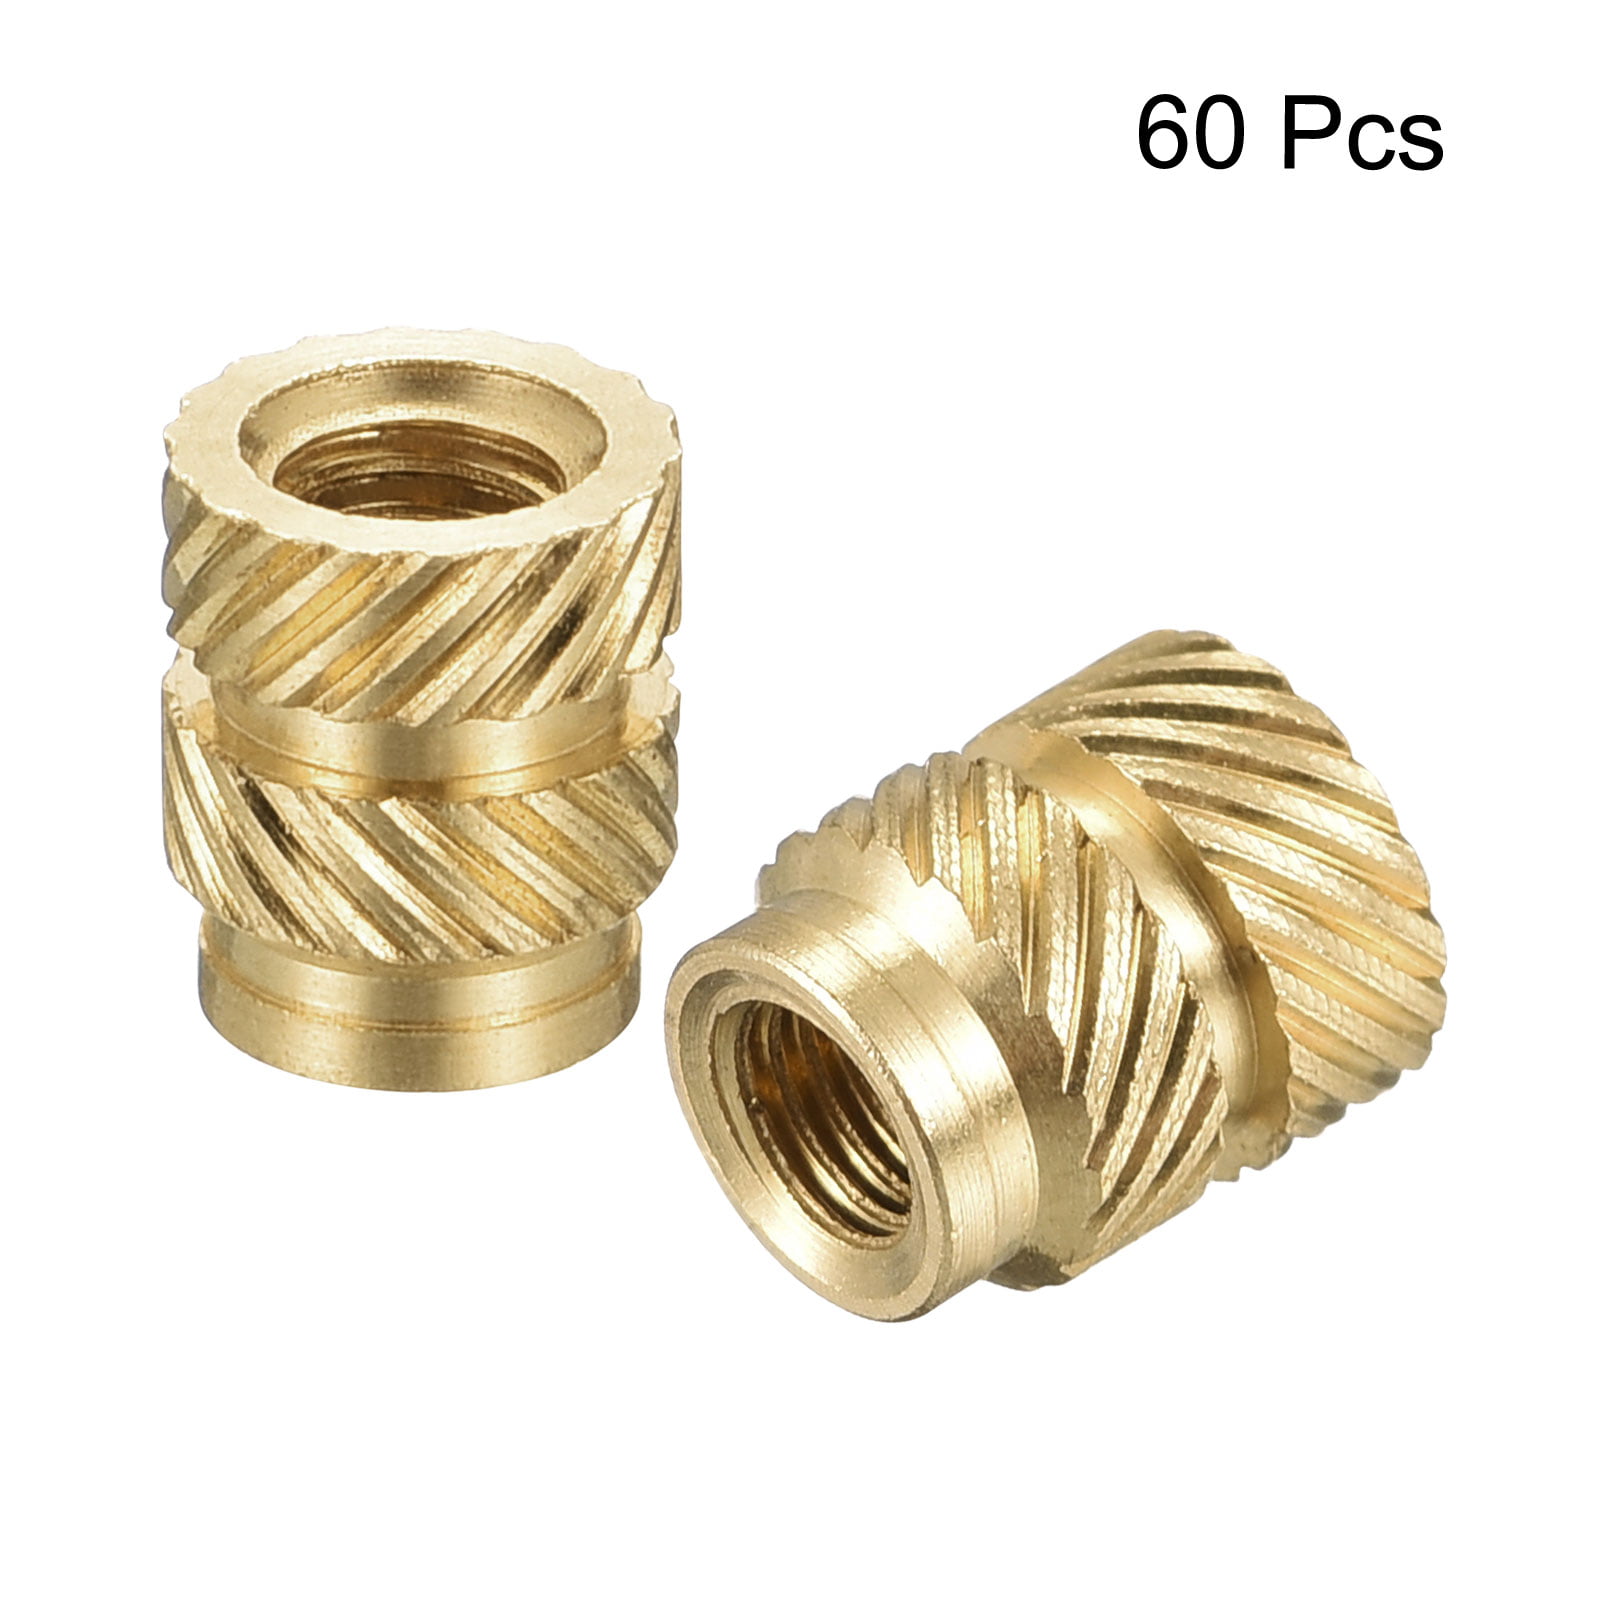 uxcell Knurled Insert Nuts - 50Pcs M3 x 4mm Length x 5mm OD Female Thread  Brass Threaded Insert Embedment Nut for 3D Printer